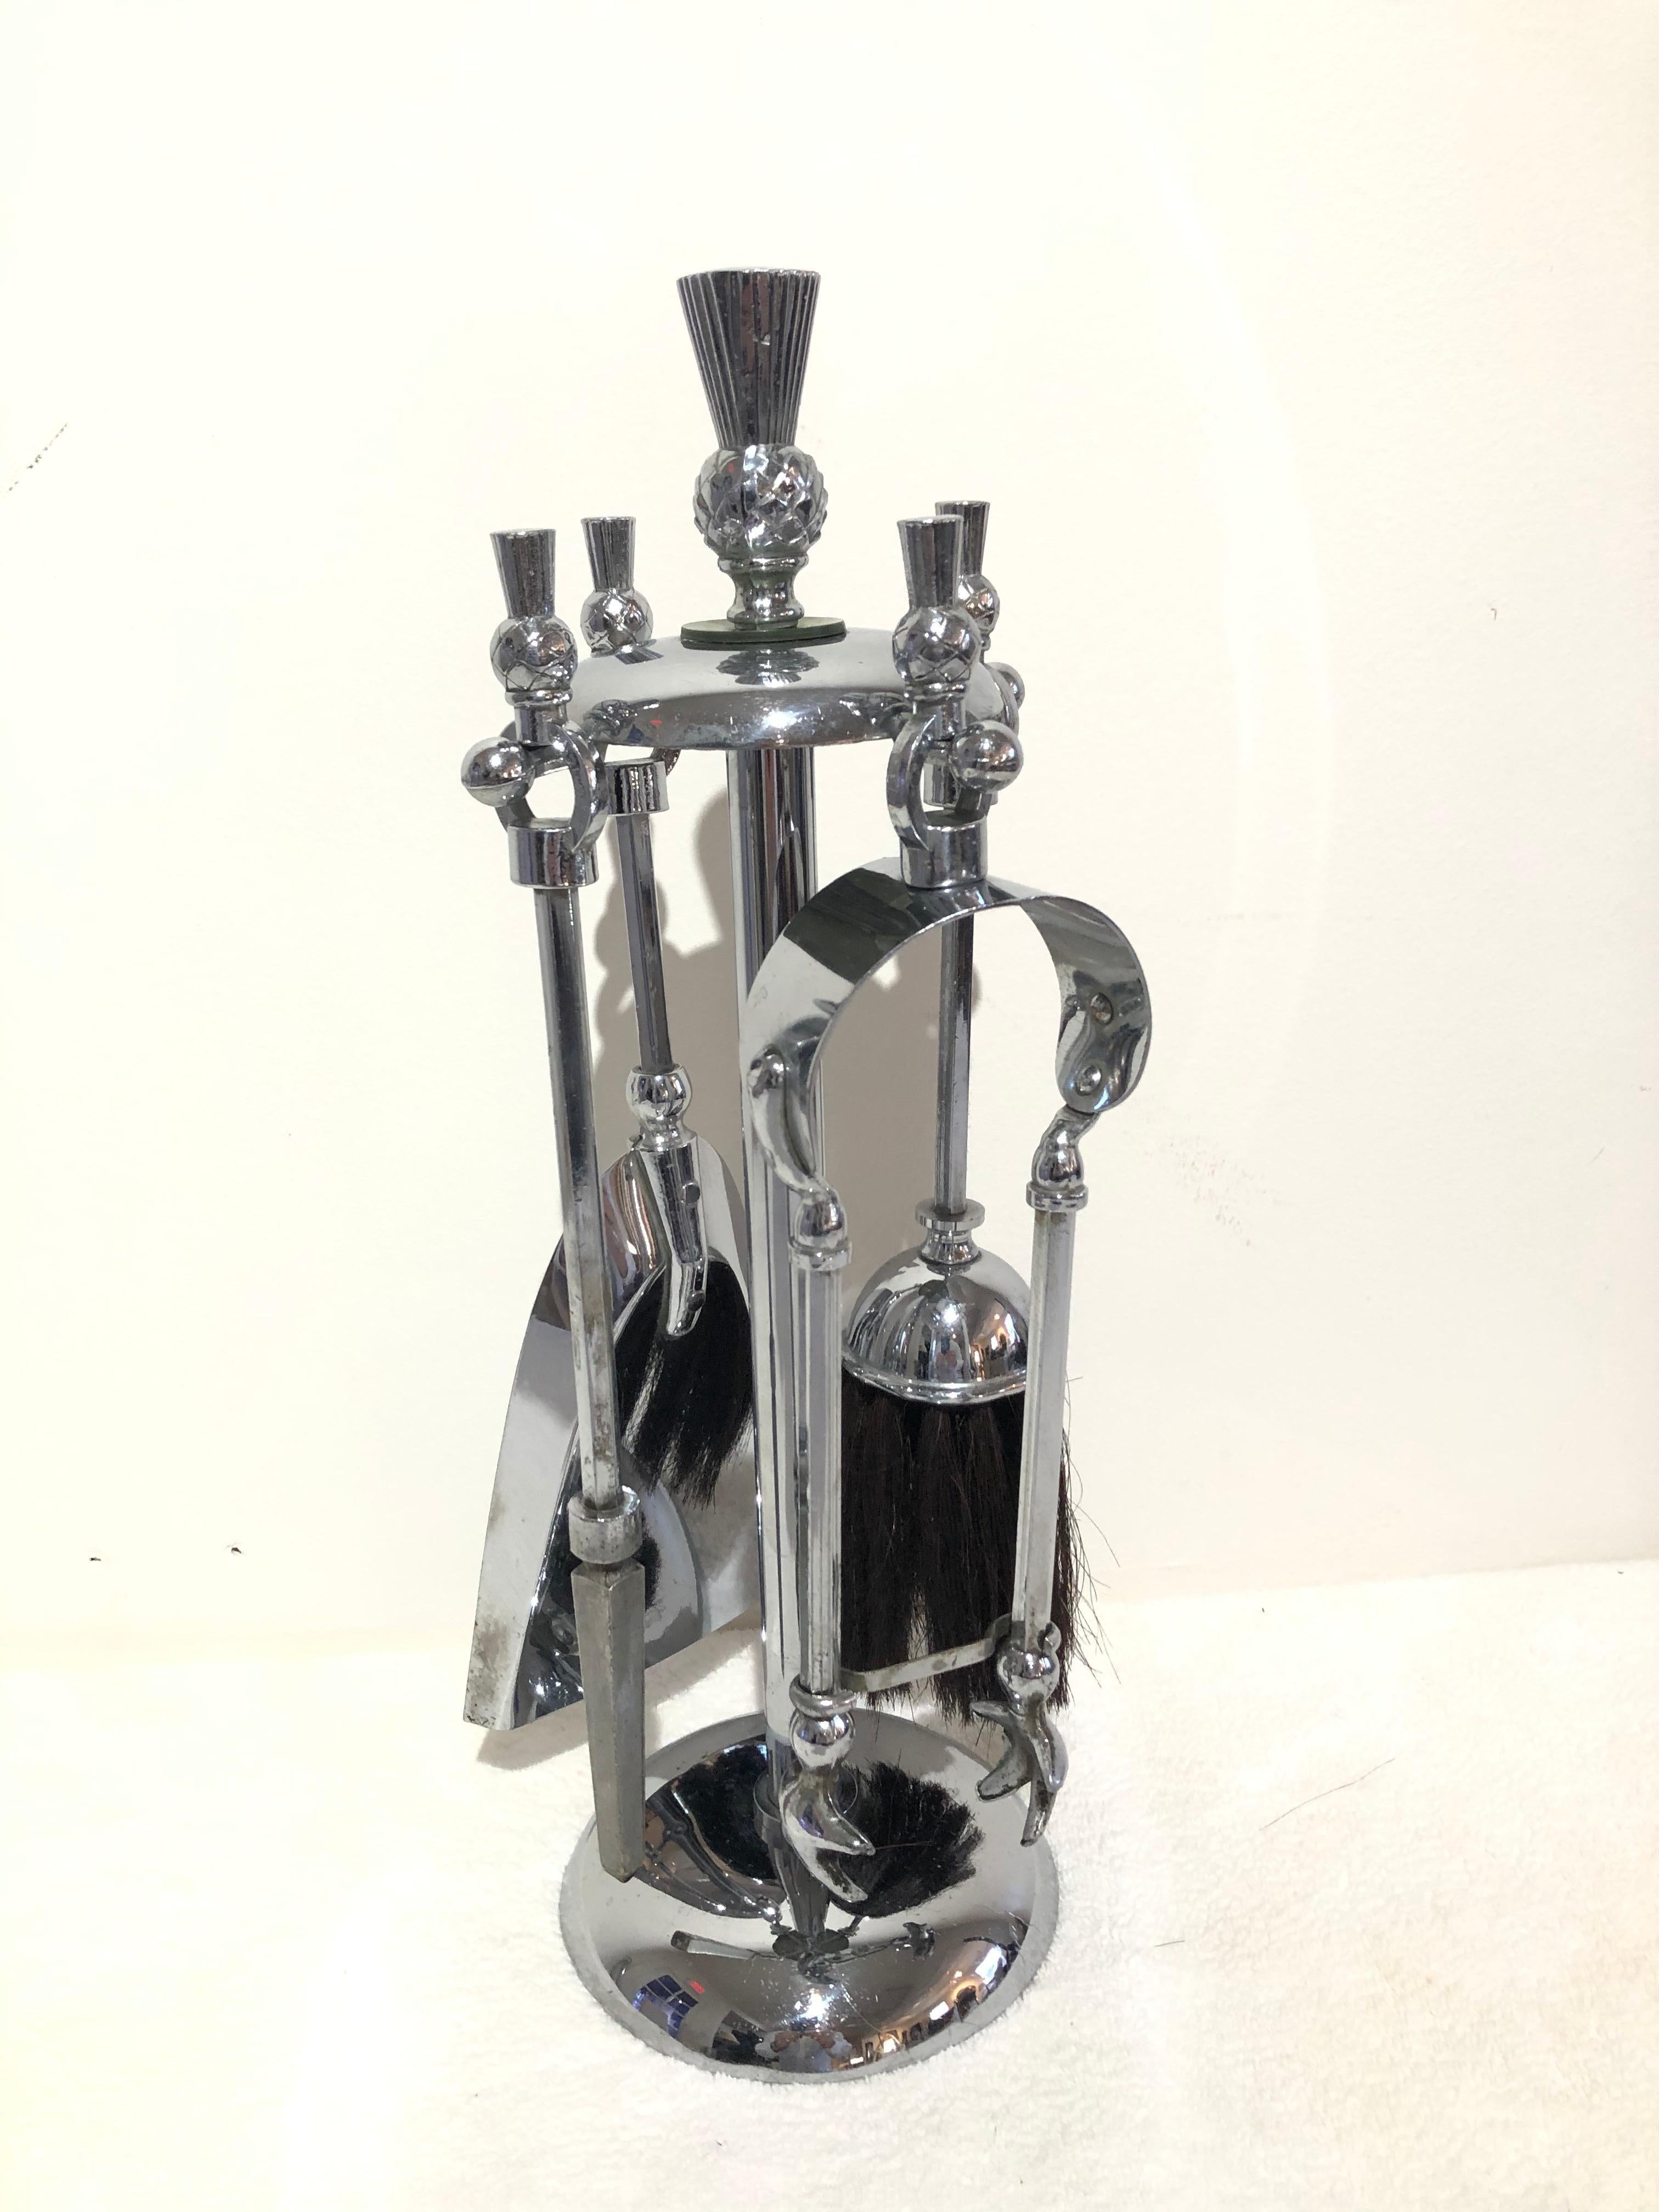 Art Deco petite chrome or Bakelite disk thistle design top fireplace tools all original finish, shovel, tongs, brush, and poker together with circular holder.